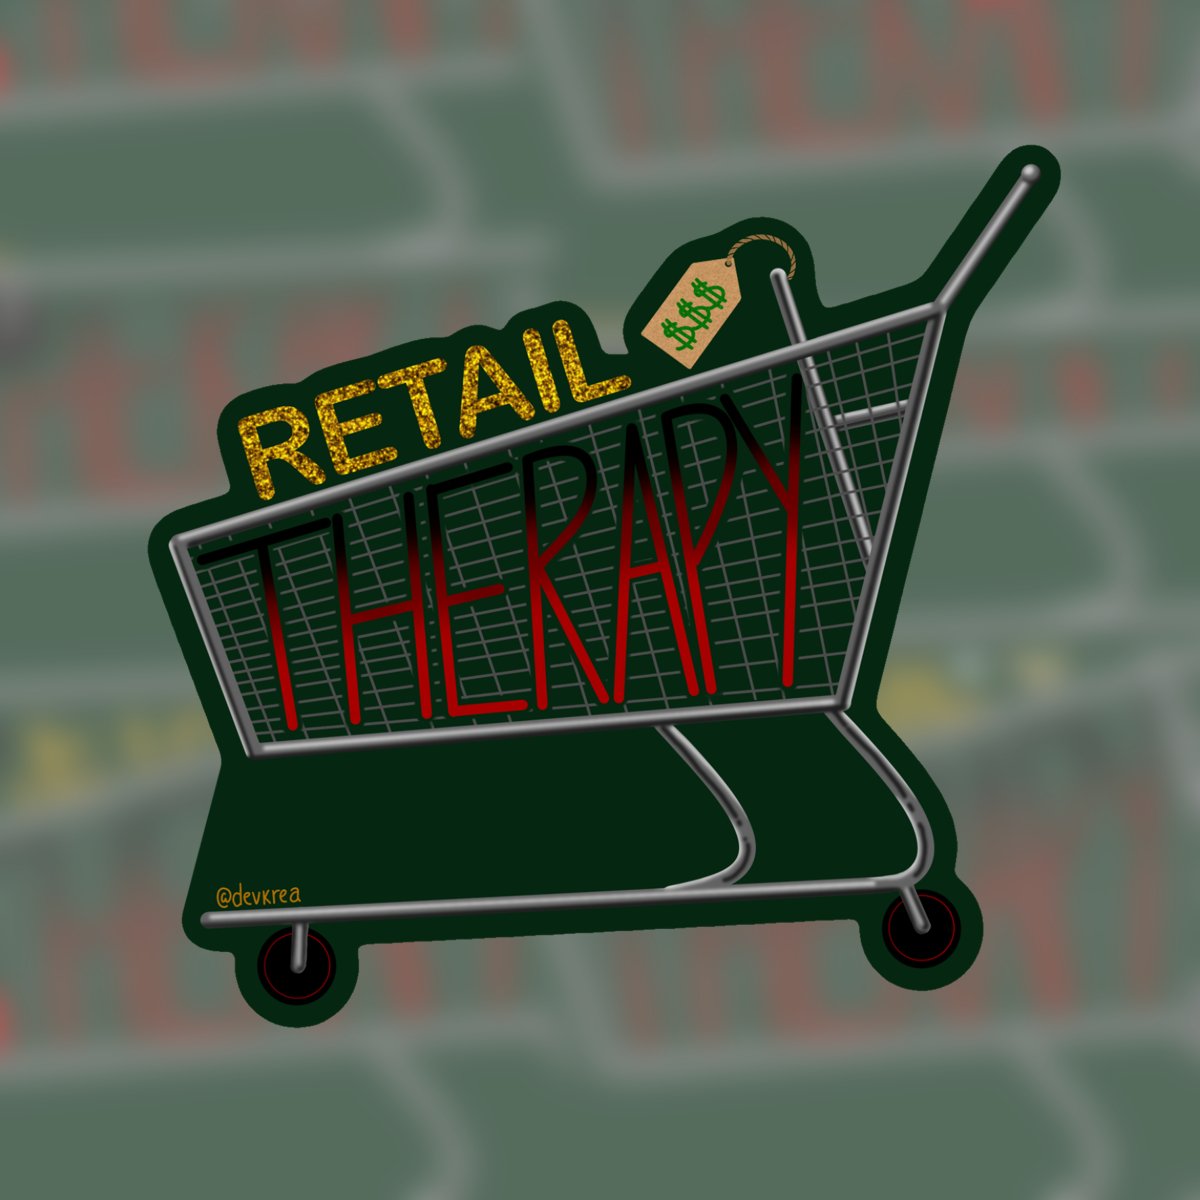 Retail Therapy 3" Vinyl Sticker | Deviant Kreations - Deviantkreations